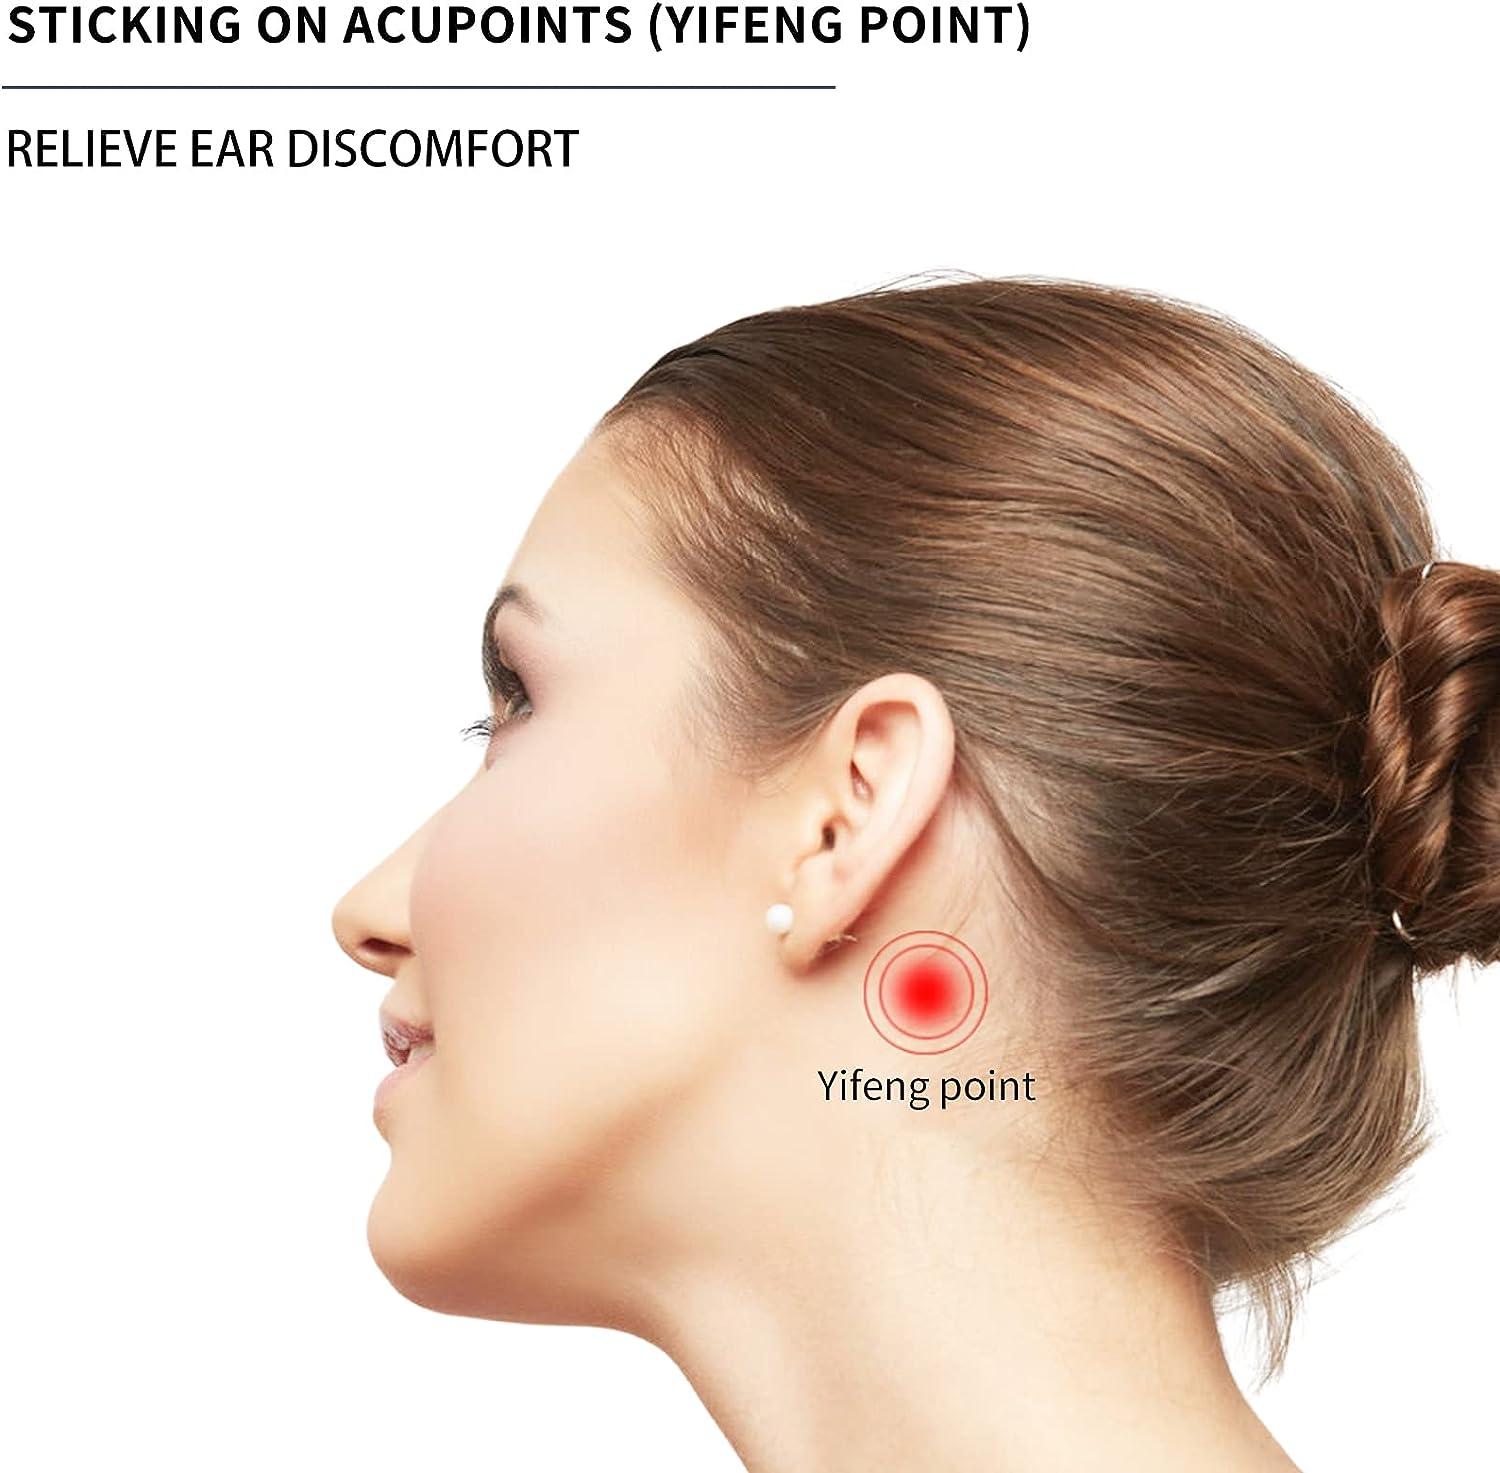 Acu Note] A Case of Ringing in the Ear (Tinnitus) improved by Acupuncture -  Cozy Acupuncture in Salem, MA